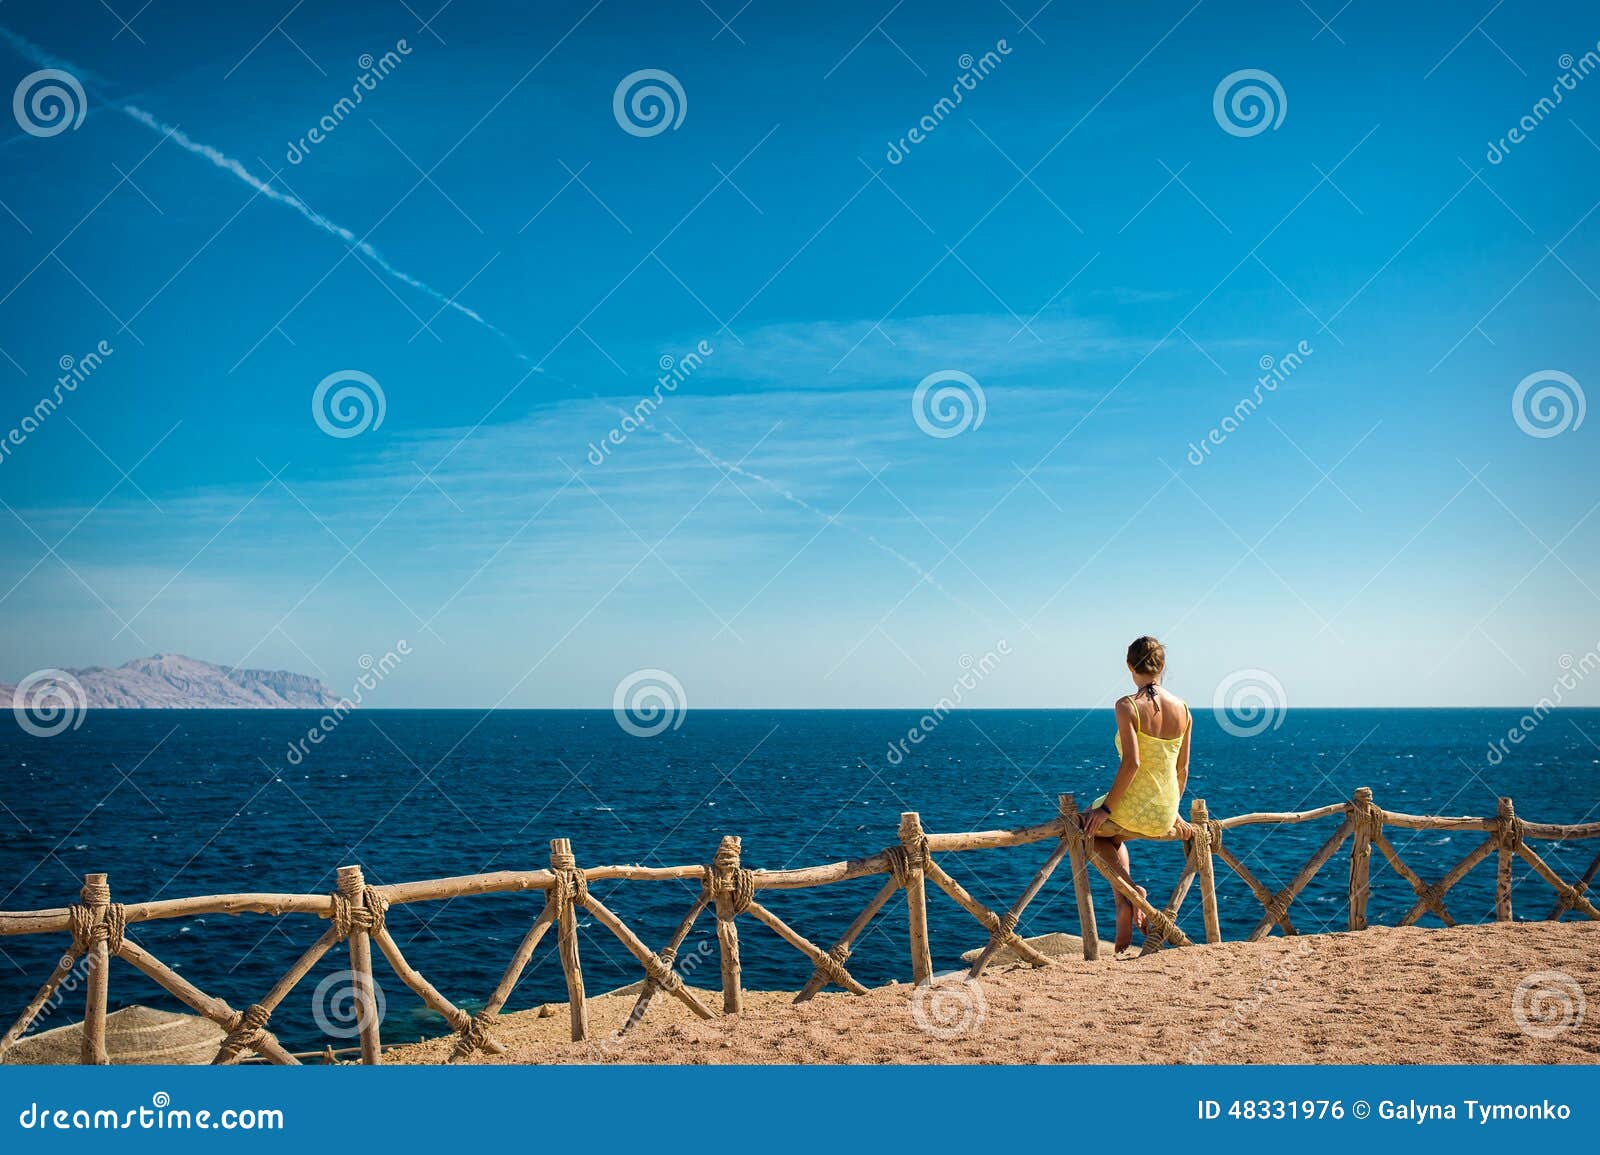 woman looks at the sea and the island of tiran